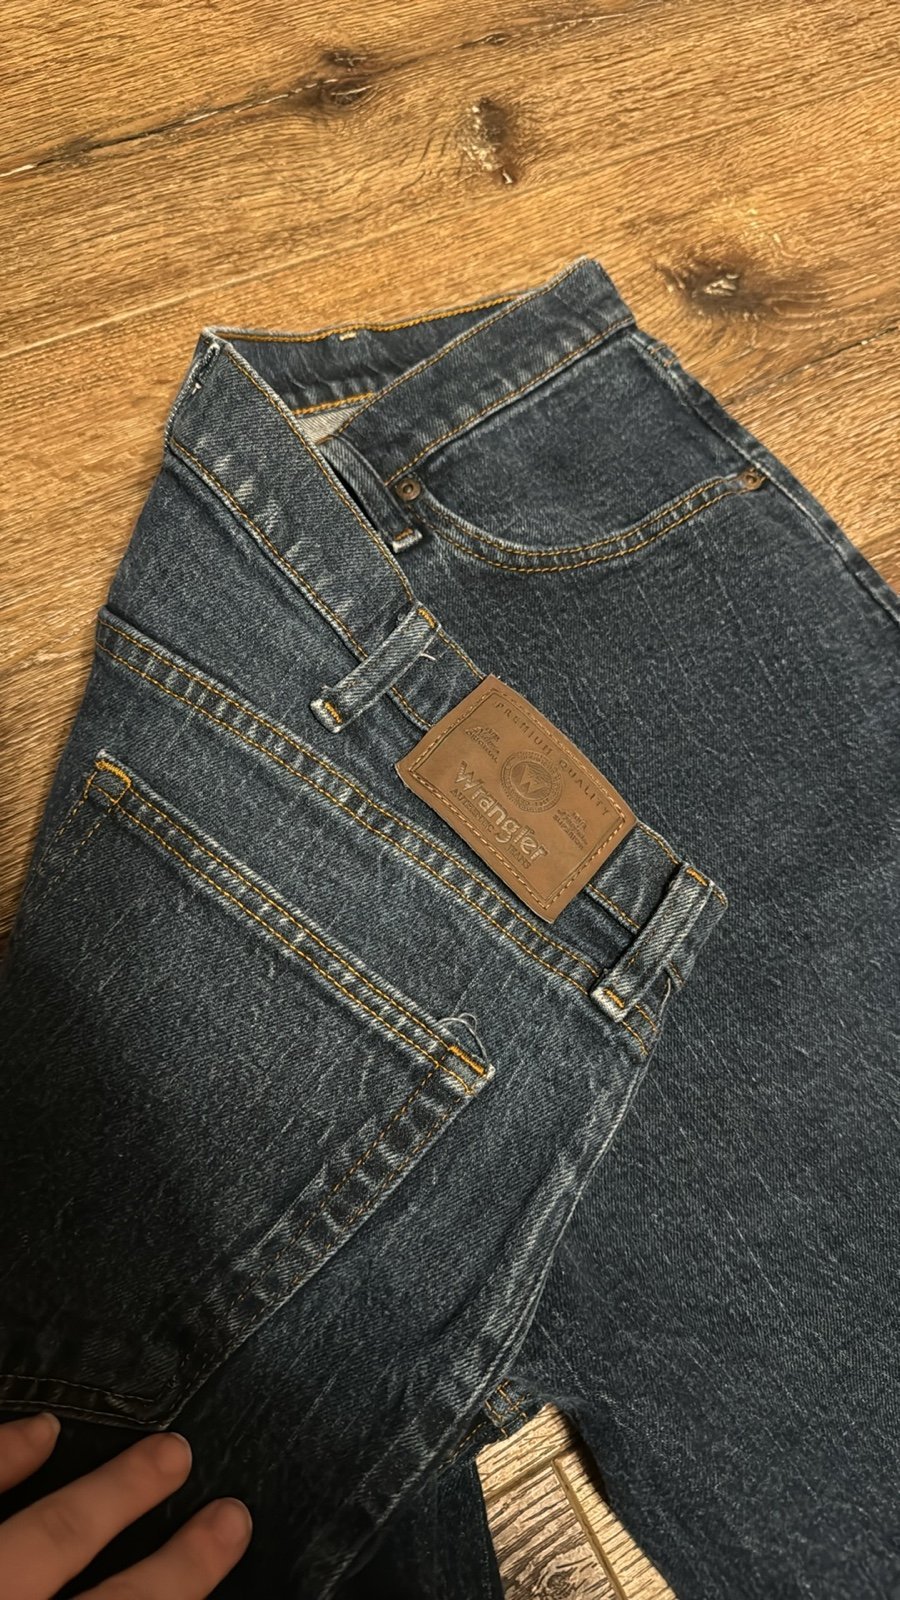 Authentic Wrangler jeans 40x32 p8uhH3x3O Outlet Store